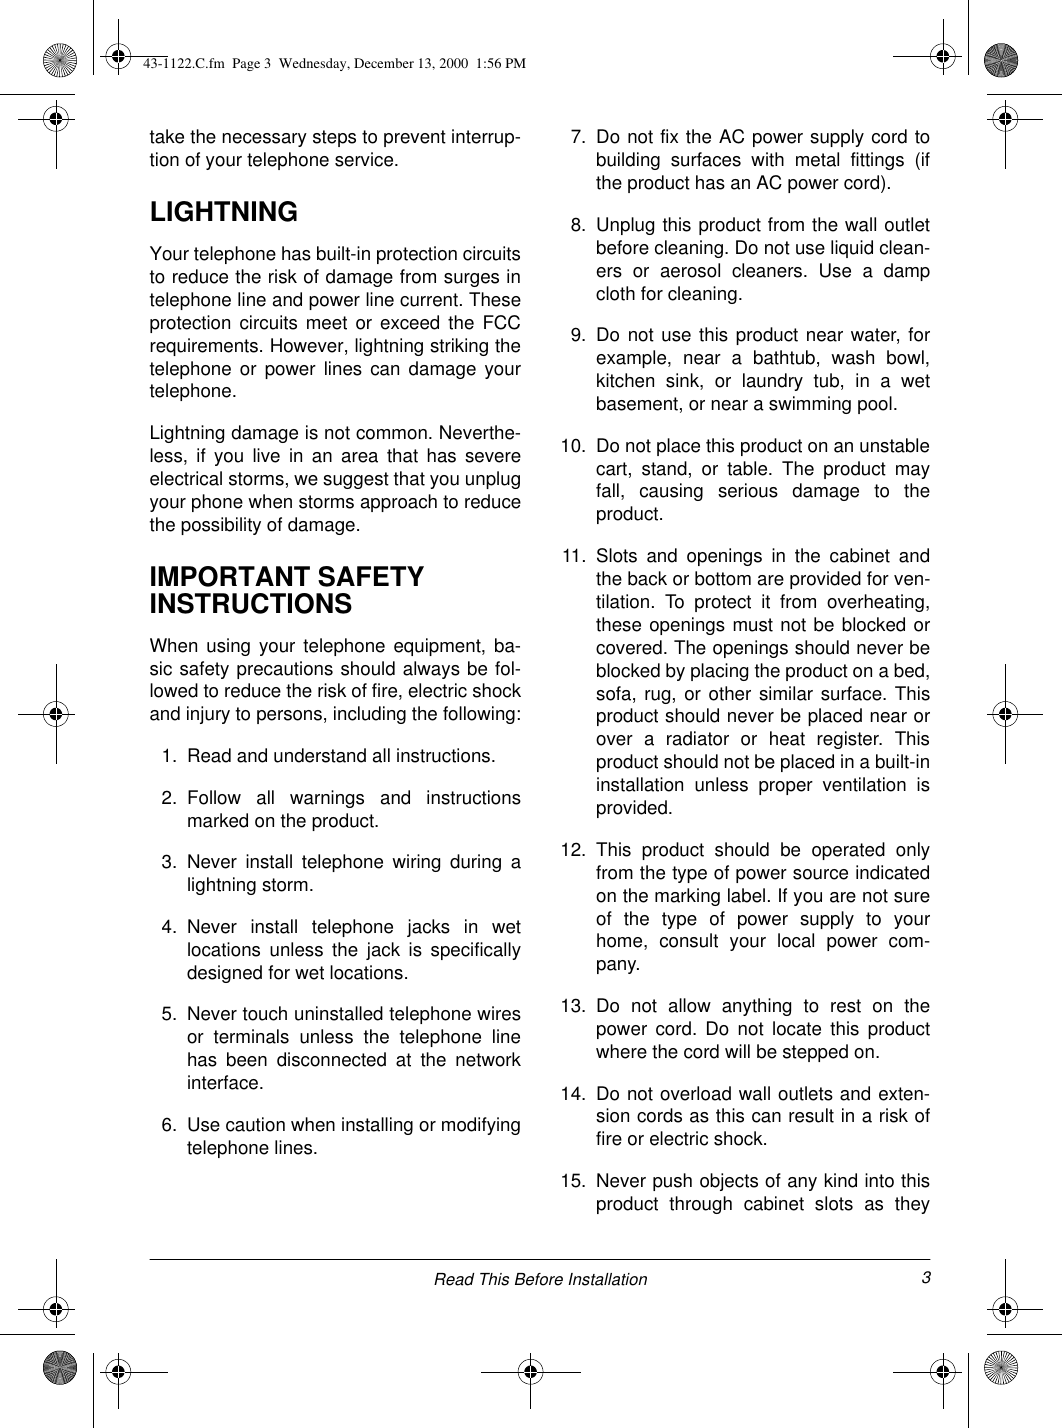 3Read This Before Installationtake the necessary steps to prevent interrup-tion of your telephone service.LIGHTNINGYour telephone has built-in protection circuitsto reduce the risk of damage from surges intelephone line and power line current. Theseprotection circuits meet or exceed the FCCrequirements. However, lightning striking thetelephone or power lines can damage yourtelephone.Lightning damage is not common. Neverthe-less, if you live in an area that has severeelectrical storms, we suggest that you unplugyour phone when storms approach to reducethe possibility of damage.IMPORTANT SAFETY INSTRUCTIONSWhen using your telephone equipment, ba-sic safety precautions should always be fol-lowed to reduce the risk of fire, electric shockand injury to persons, including the following:1. Read and understand all instructions.2. Follow all warnings and instructionsmarked on the product.3. Never install telephone wiring during alightning storm.4. Never install telephone jacks in wetlocations unless the jack is specificallydesigned for wet locations.5. Never touch uninstalled telephone wiresor terminals unless the telephone linehas been disconnected at the networkinterface.6. Use caution when installing or modifyingtelephone lines.7. Do not fix the AC power supply cord tobuilding surfaces with metal fittings (ifthe product has an AC power cord).8. Unplug this product from the wall outletbefore cleaning. Do not use liquid clean-ers or aerosol cleaners. Use a dampcloth for cleaning. 9. Do not use this product near water, forexample, near a bathtub, wash bowl,kitchen sink, or laundry tub, in a wetbasement, or near a swimming pool.10. Do not place this product on an unstablecart, stand, or table. The product mayfall, causing serious damage to theproduct.11. Slots and openings in the cabinet andthe back or bottom are provided for ven-tilation. To protect it from overheating,these openings must not be blocked orcovered. The openings should never beblocked by placing the product on a bed,sofa, rug, or other similar surface. Thisproduct should never be placed near orover a radiator or heat register. Thisproduct should not be placed in a built-ininstallation unless proper ventilation isprovided.12. This product should be operated onlyfrom the type of power source indicatedon the marking label. If you are not sureof the type of power supply to yourhome, consult your local power com-pany.13. Do not allow anything to rest on thepower cord. Do not locate this productwhere the cord will be stepped on.14. Do not overload wall outlets and exten-sion cords as this can result in a risk offire or electric shock.15. Never push objects of any kind into thisproduct through cabinet slots as they43-1122.C.fm  Page 3  Wednesday, December 13, 2000  1:56 PM